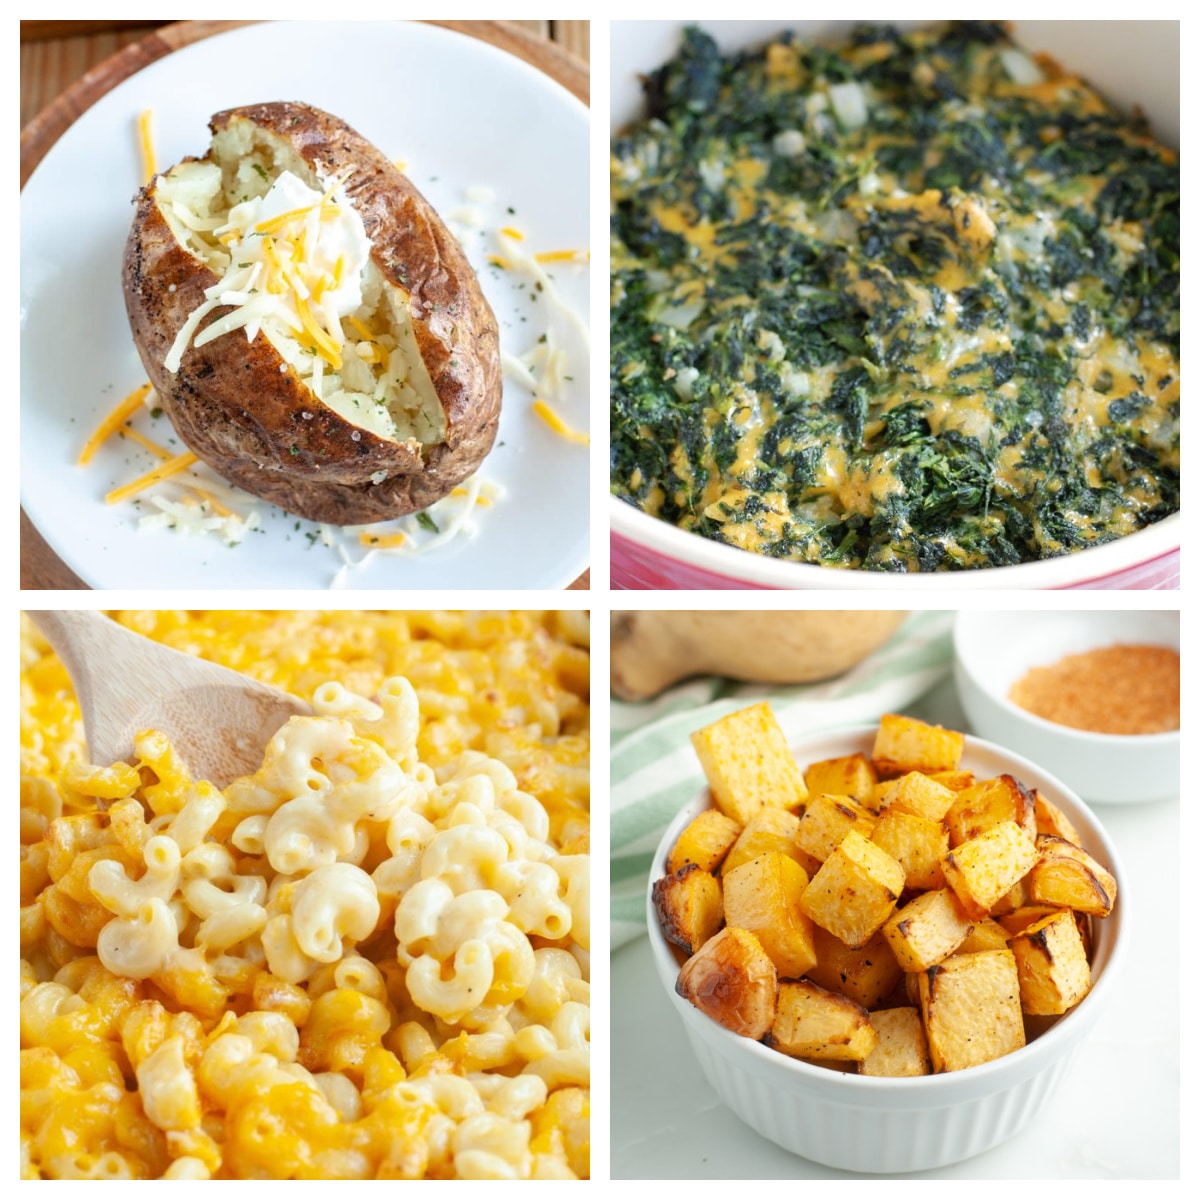 Baked potato, spinach casserole, mac and cheese, and roasted rutabaga. 